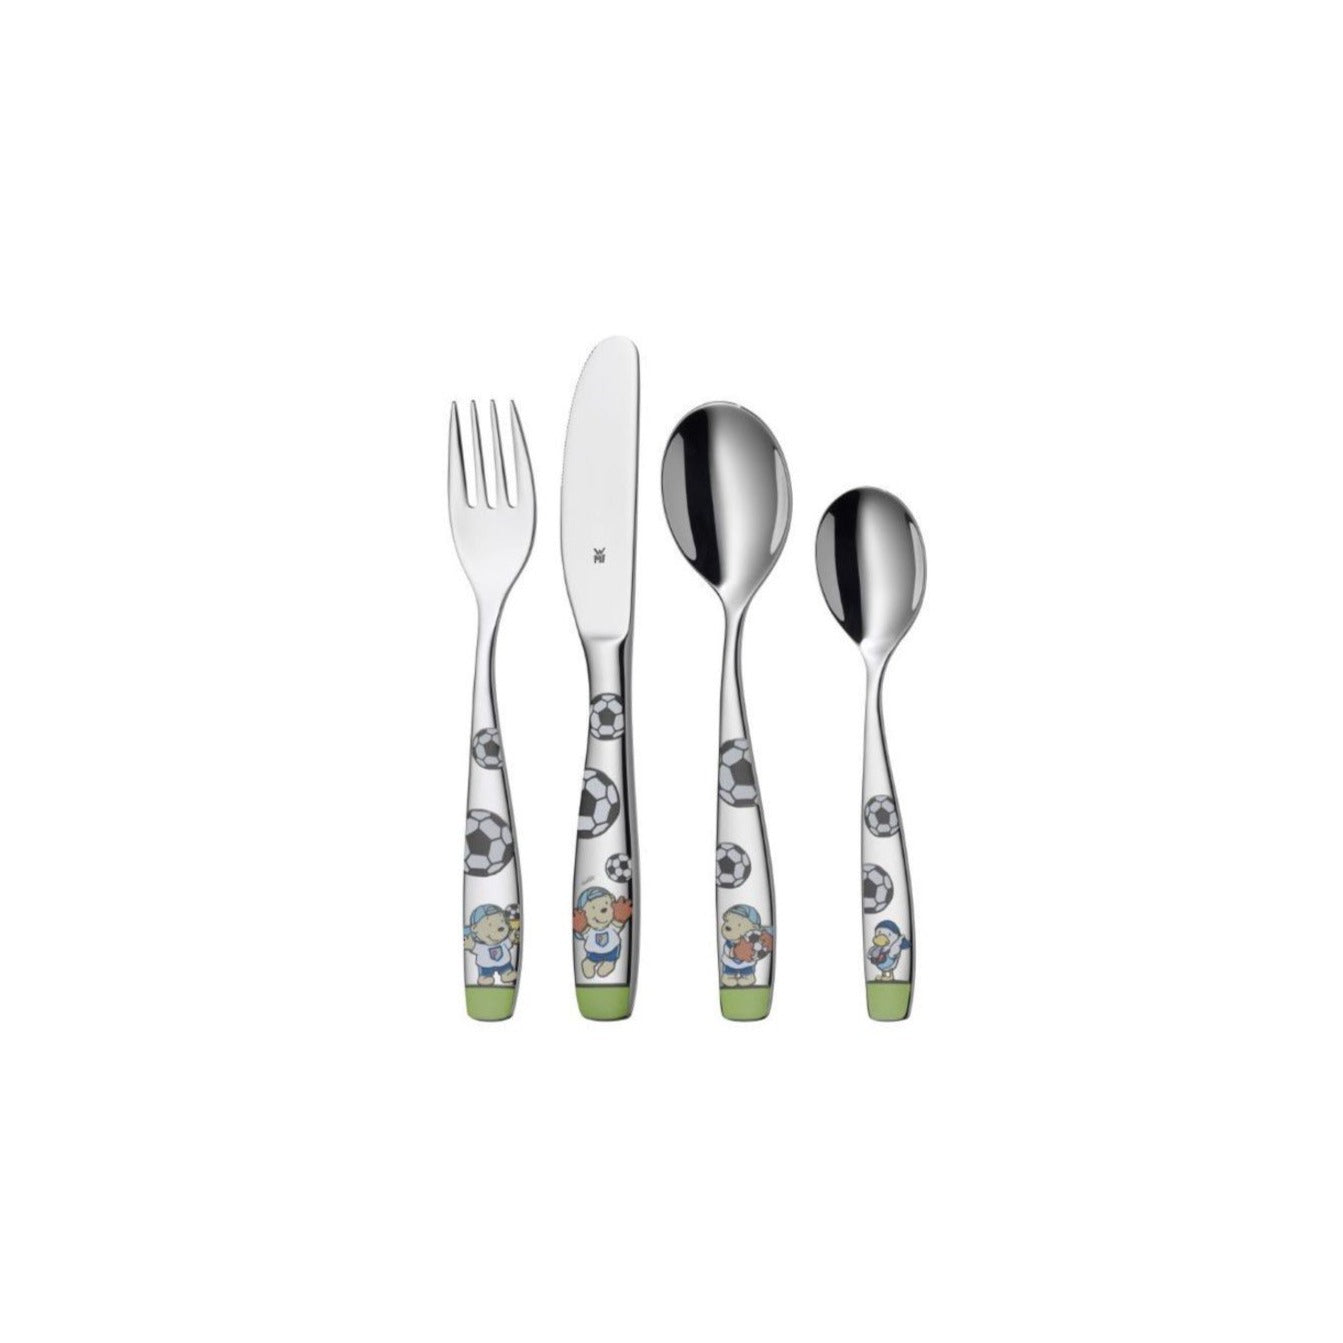 WMF Group "Soccer" Childrens Cutlery Set